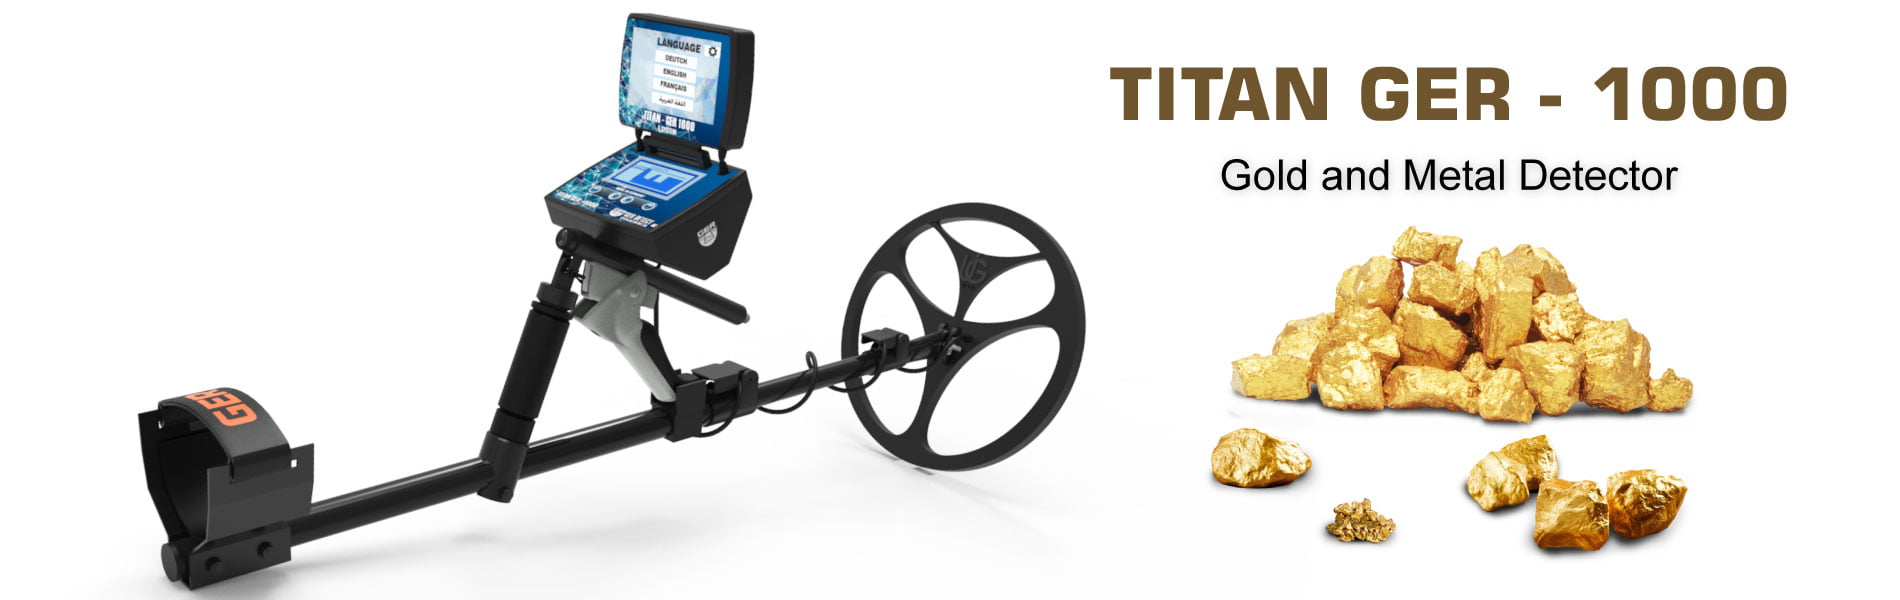 titan-ger-1000-best-detector-for-metal-and-gold